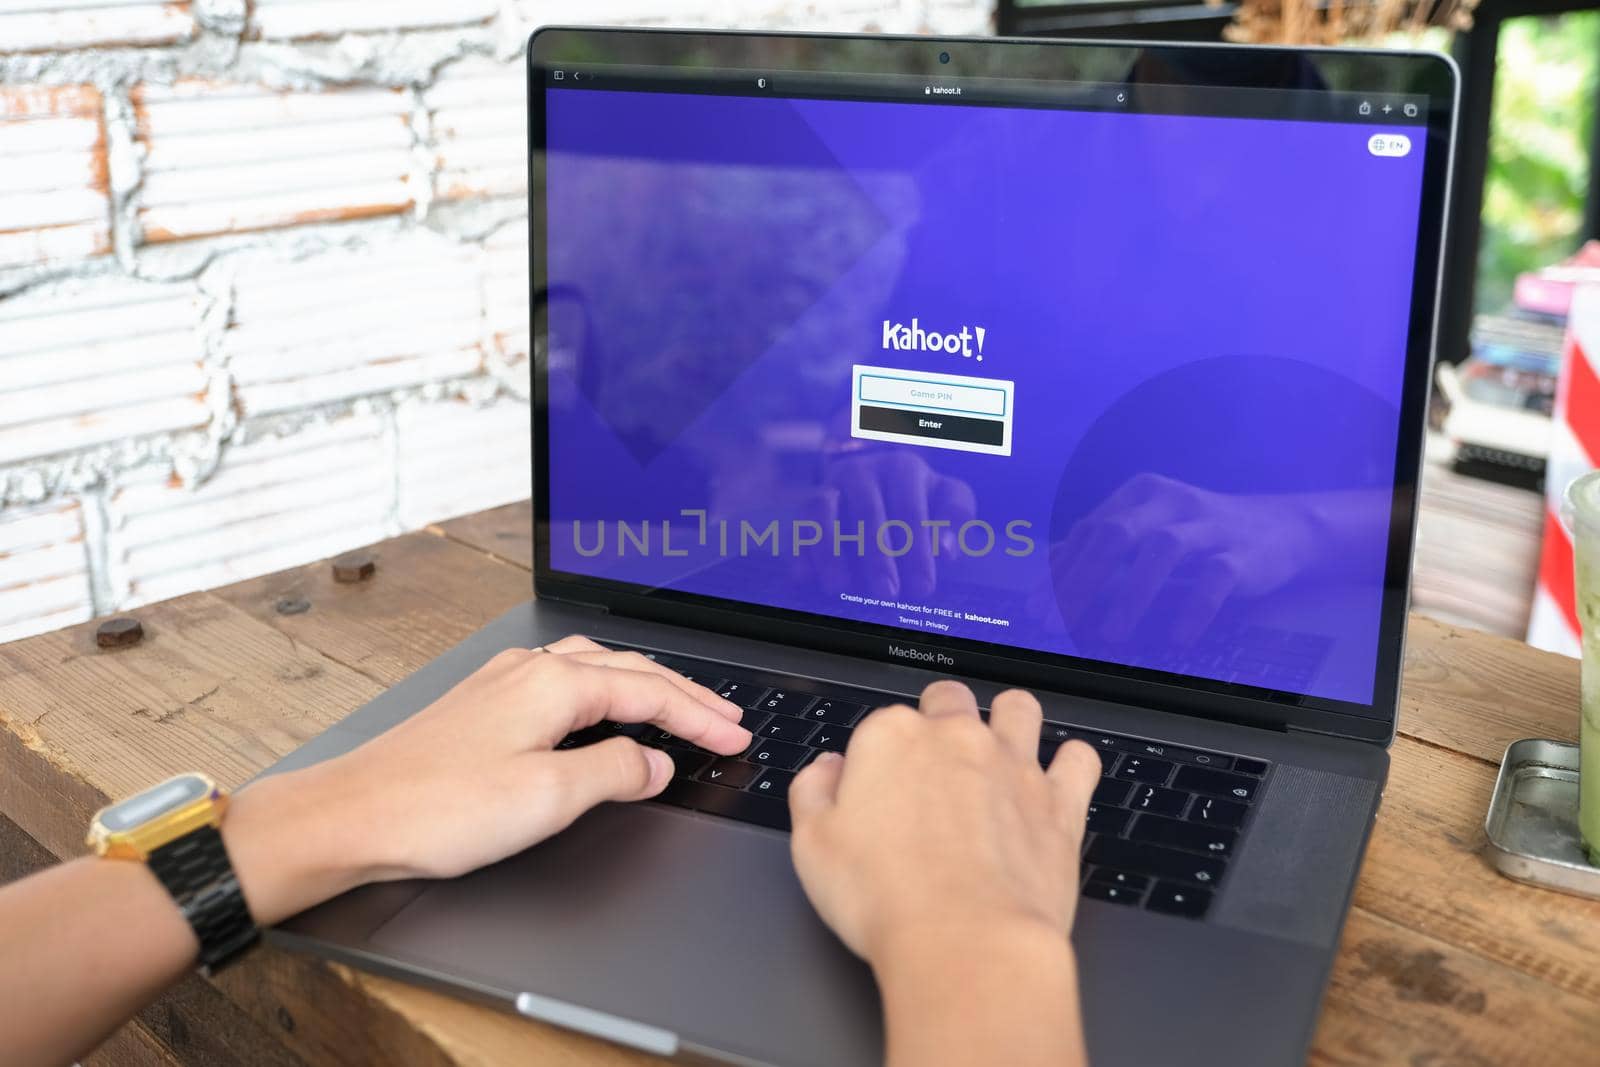 Chiangmai, Thailand - JUNE 06, 2021:person using Laptop computer displaying logo of Kahoot, a game-based learning platform